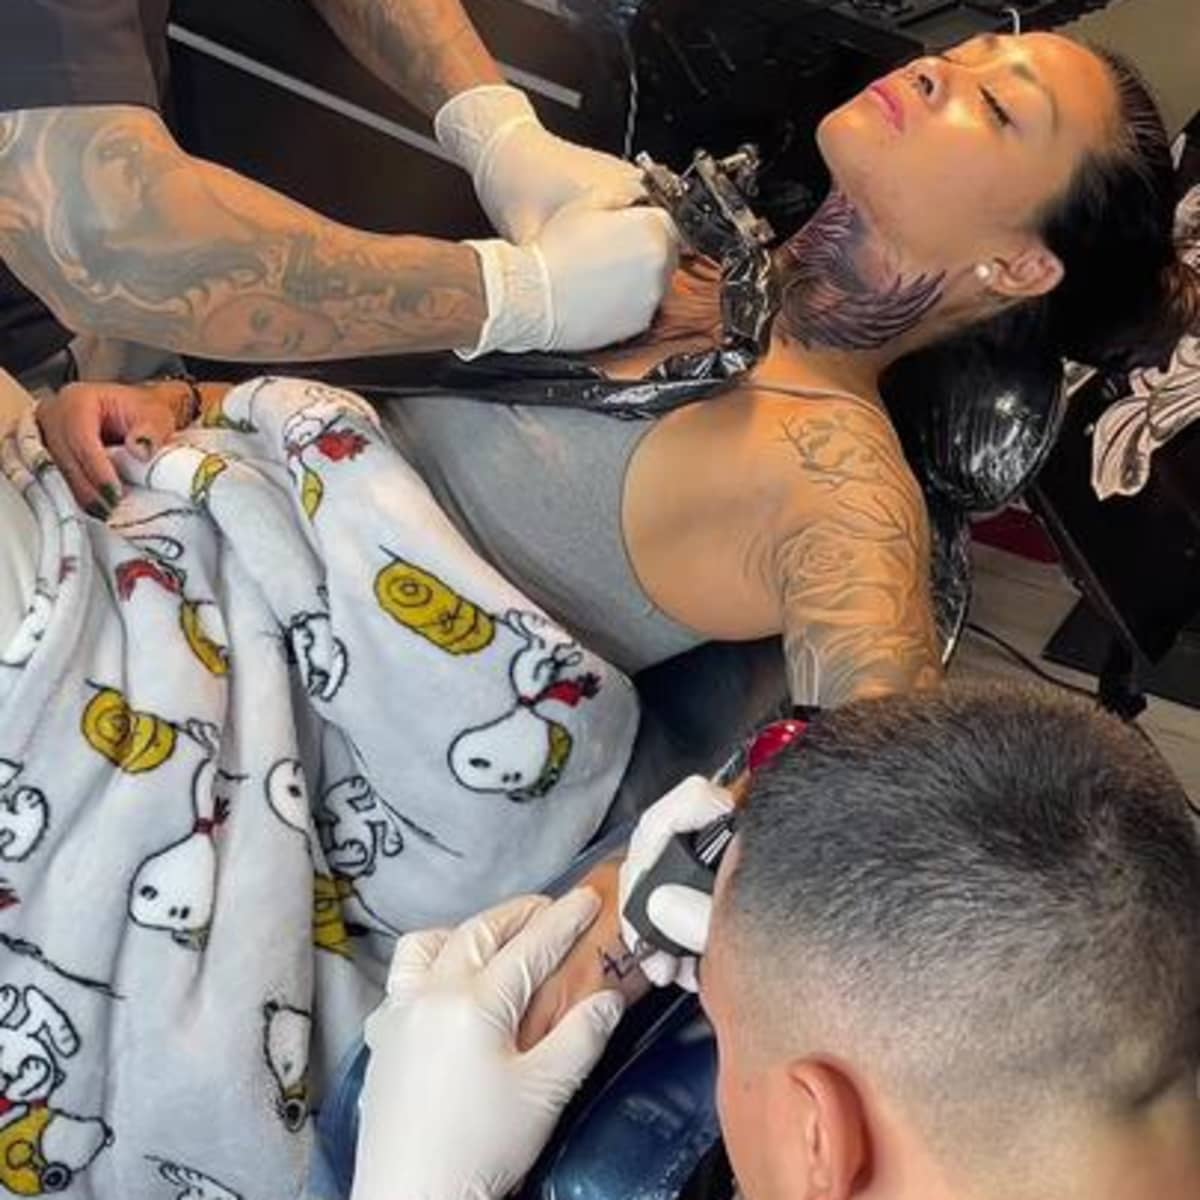 Tattoos News, In-Depth Articles, Pictures & Videos | GQ